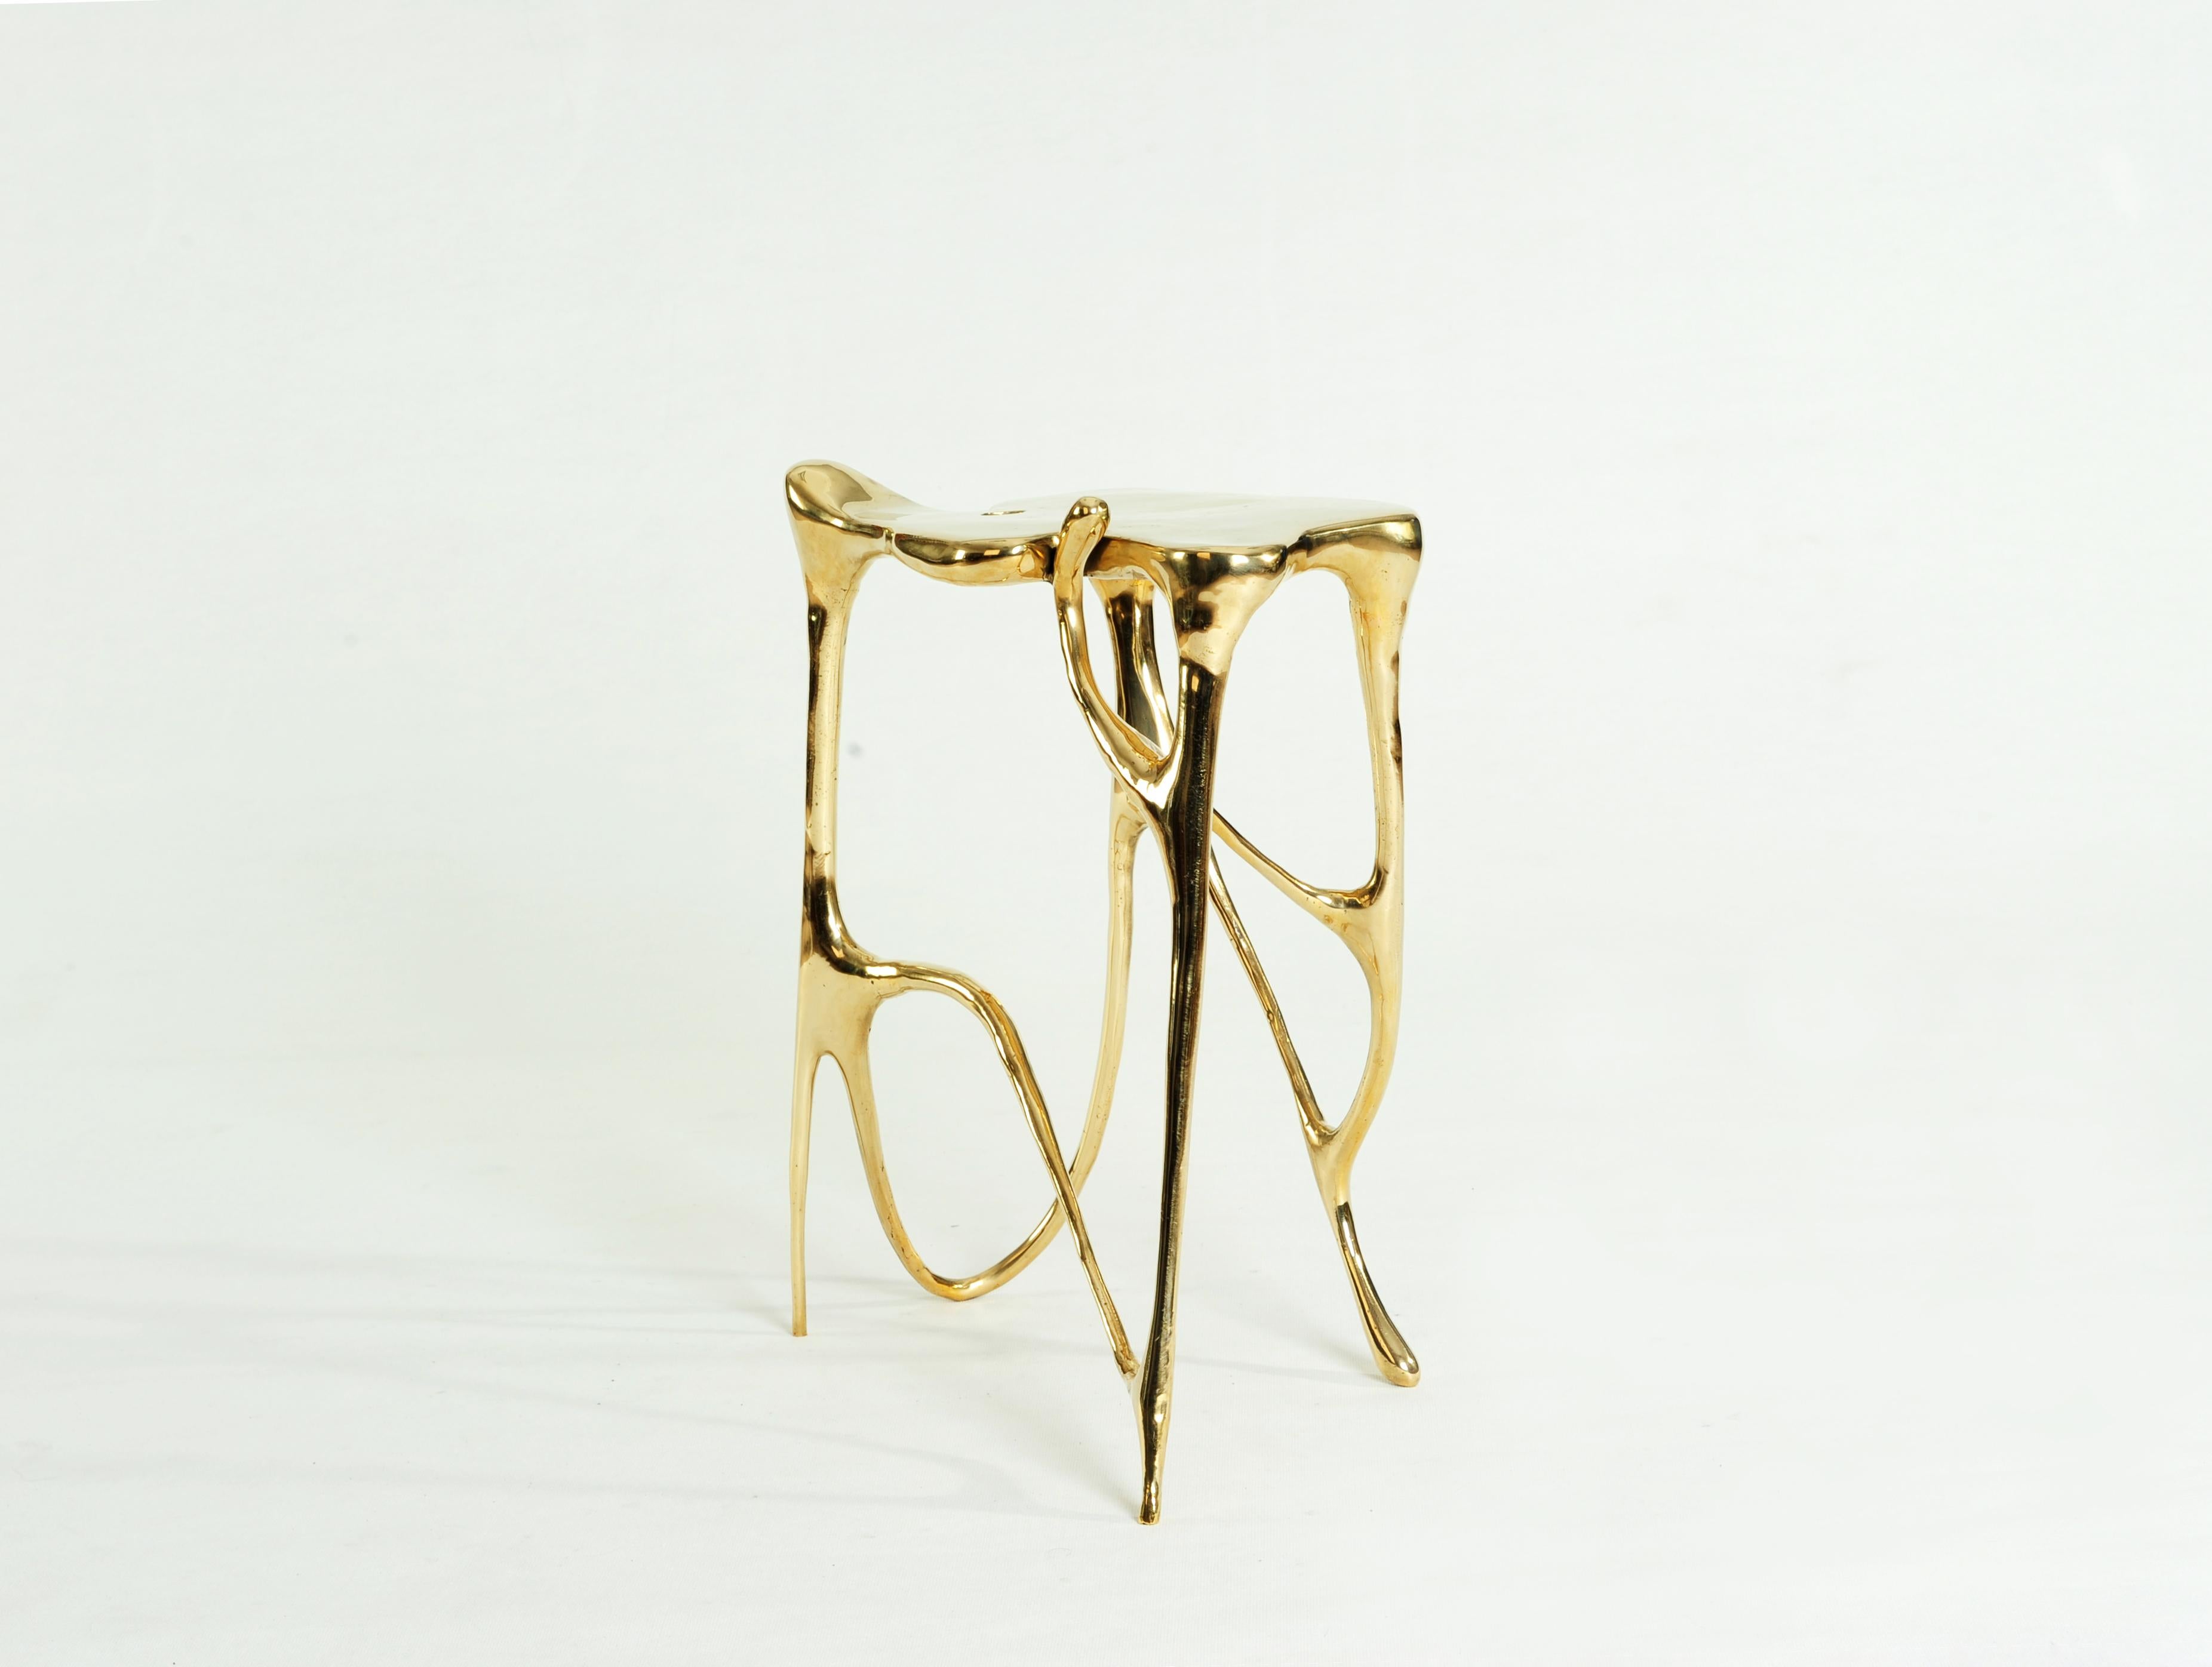 Calligraphic Sculpted Brass Side Table by Misaya 3